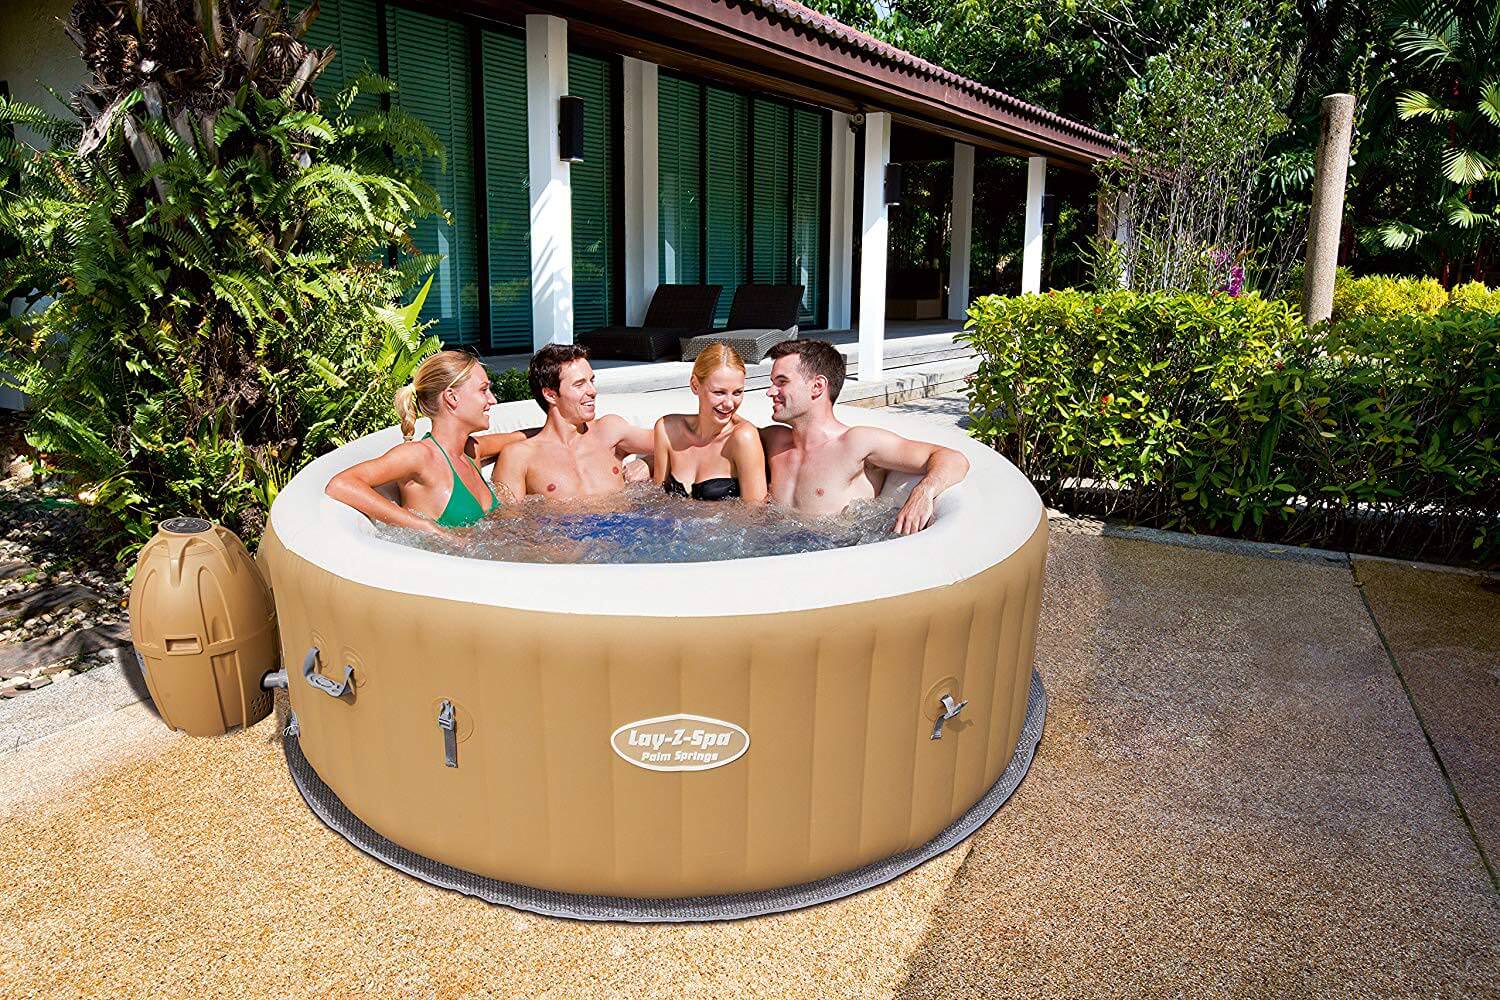 Bestway Lay-Z-Spa Hot Pure Buildings - Garden Person Jet Palm Springs Tub Air Inflatable 4-6